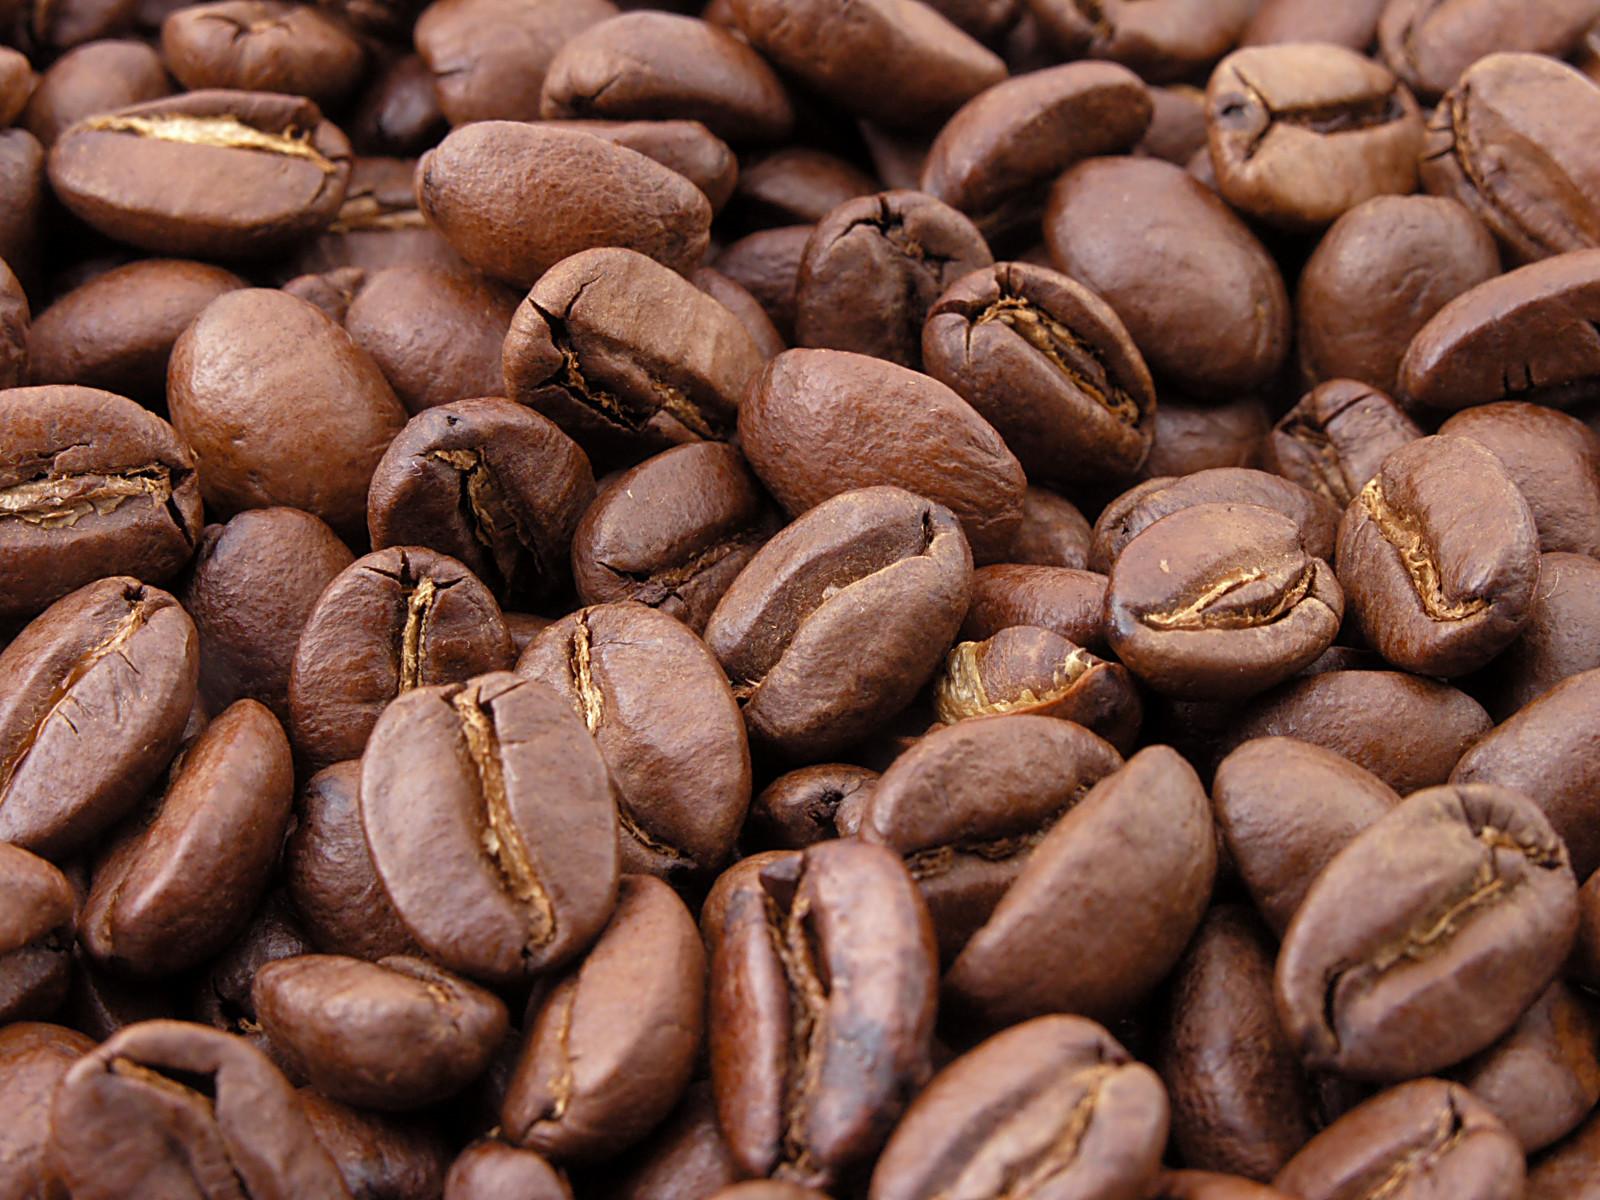 Producers from Golungo Alto put 300 tons of coffee on the market